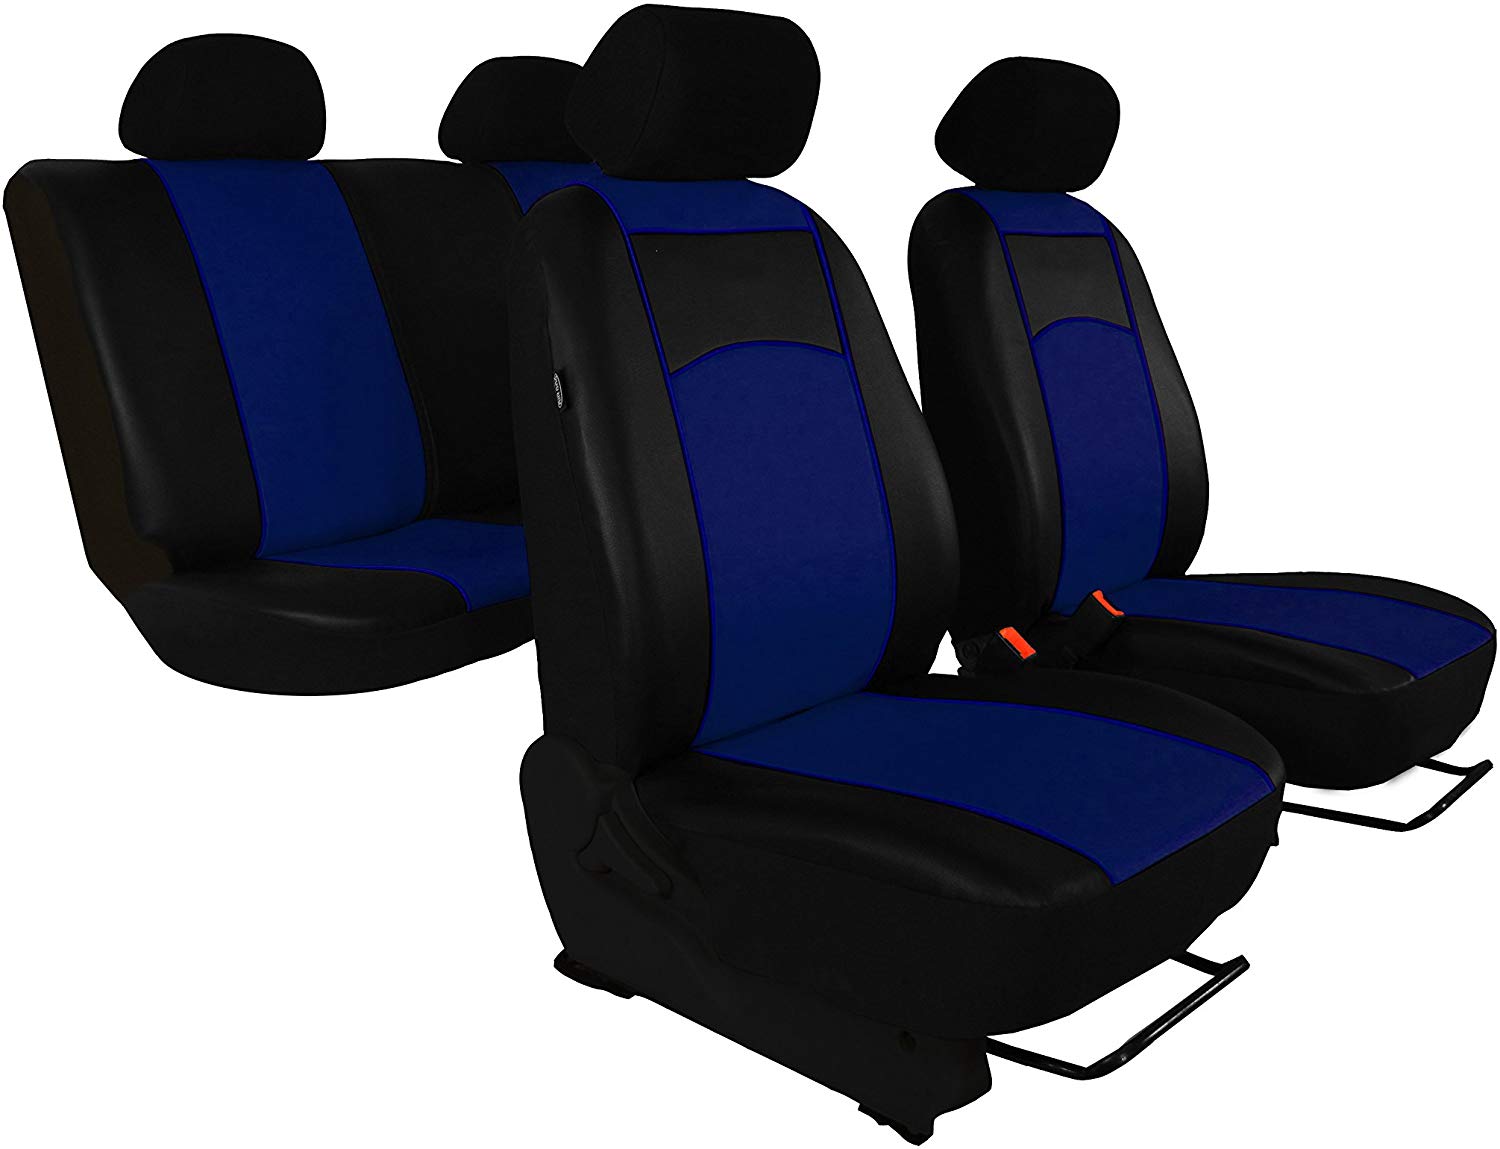 &apos;Universal Imitation Leather Seat Cover Set for A4 B5, B6, B7 Design Faux Leather with Decorative Tuning.. Includes Blue